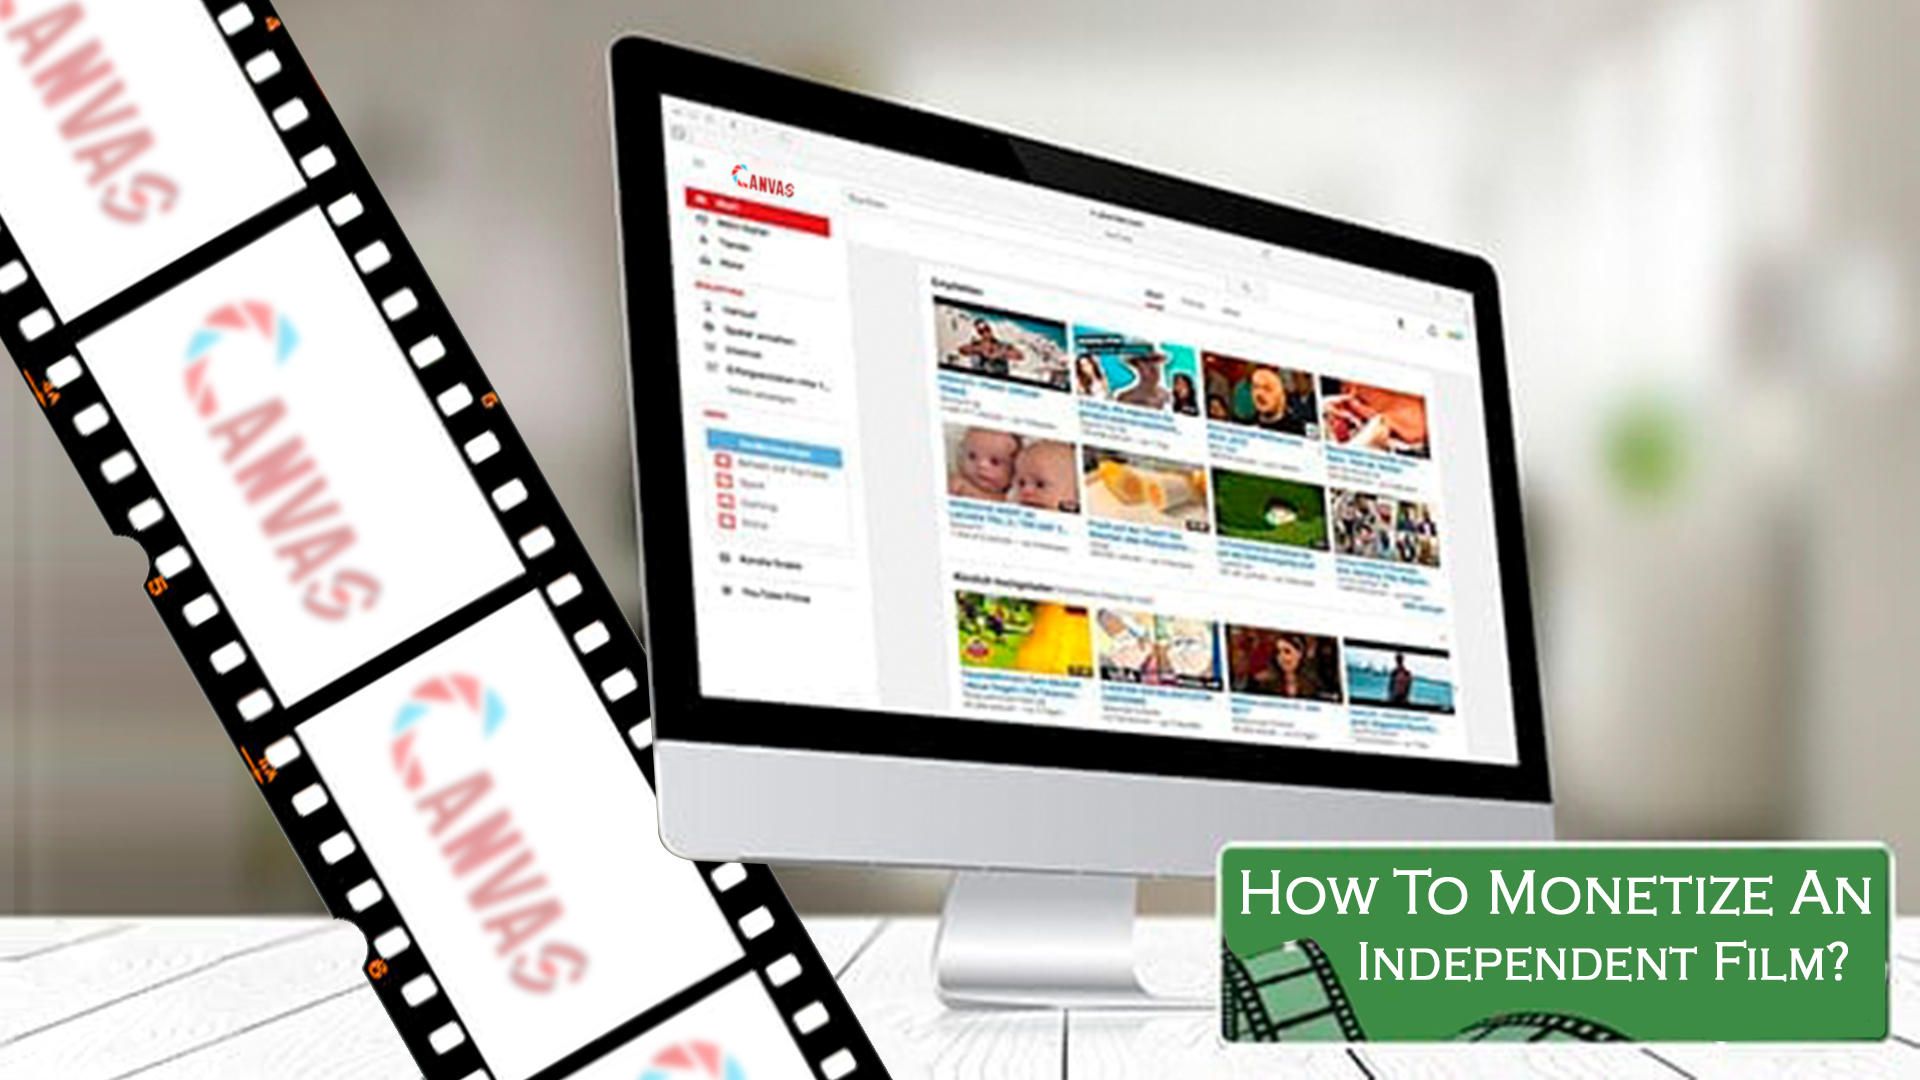 How To Monetize An Independent Film?